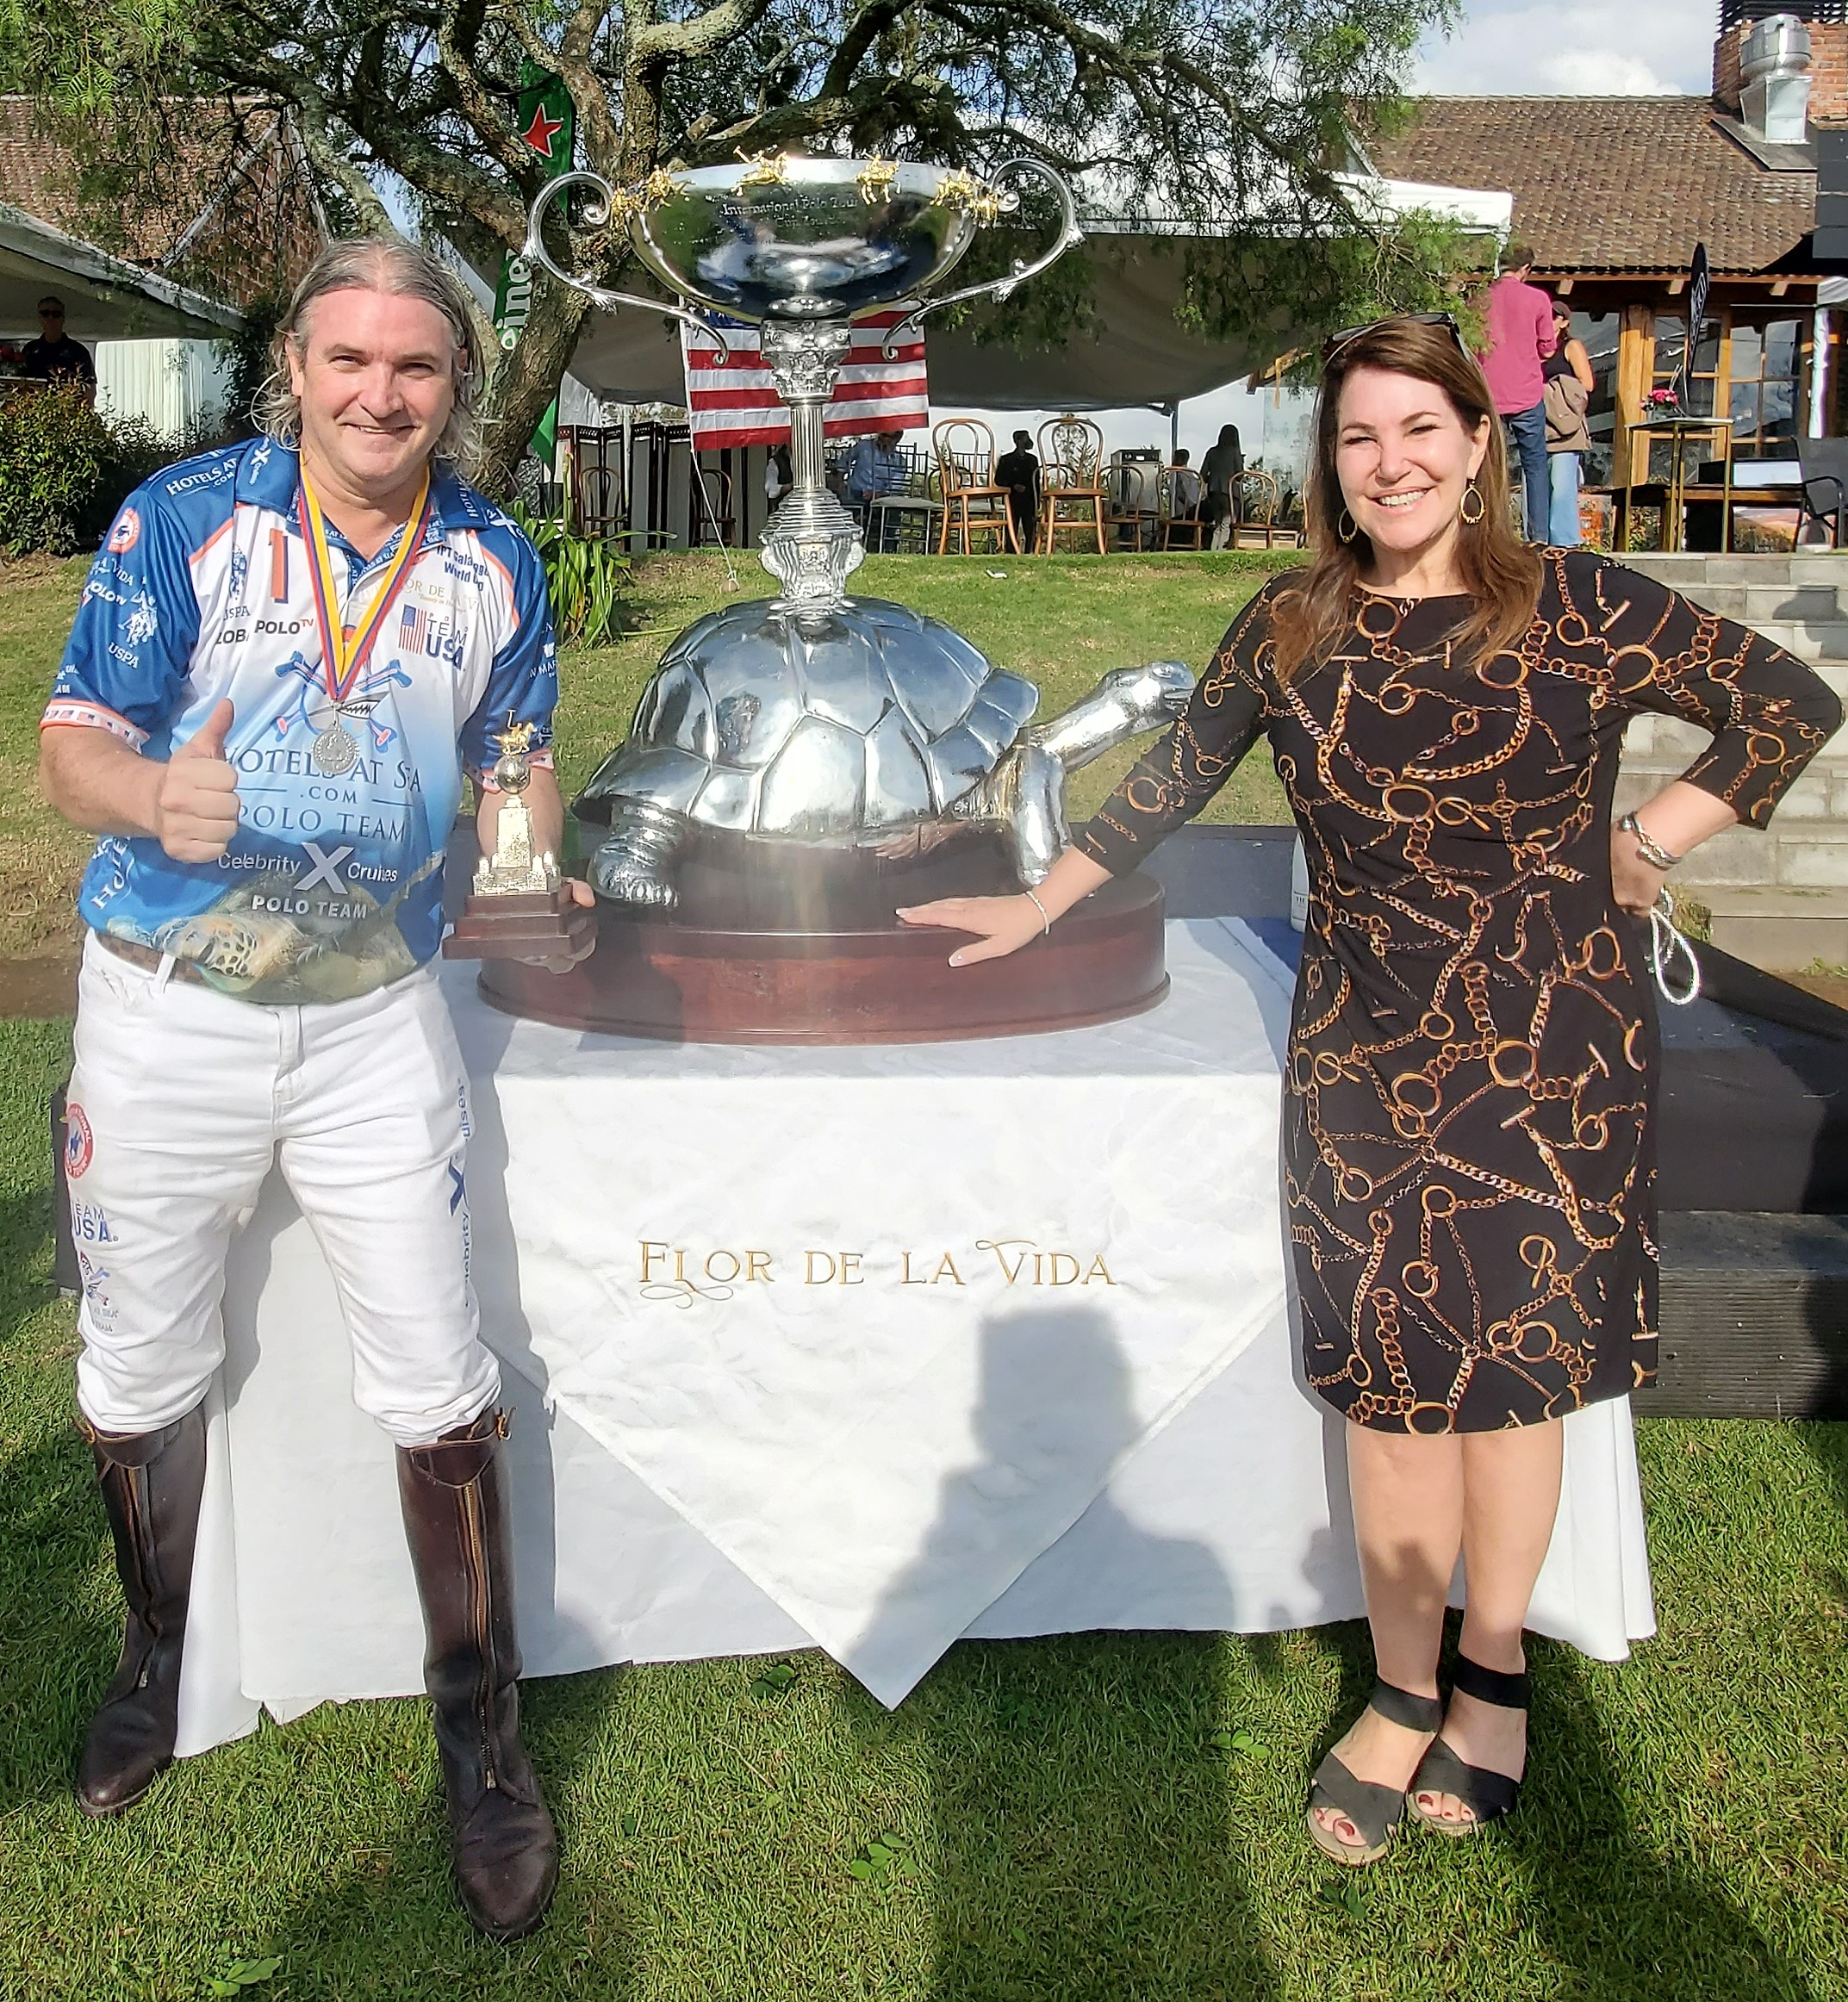 Locally based Delray Beach Polo Team owner Wins the World Cup in South America